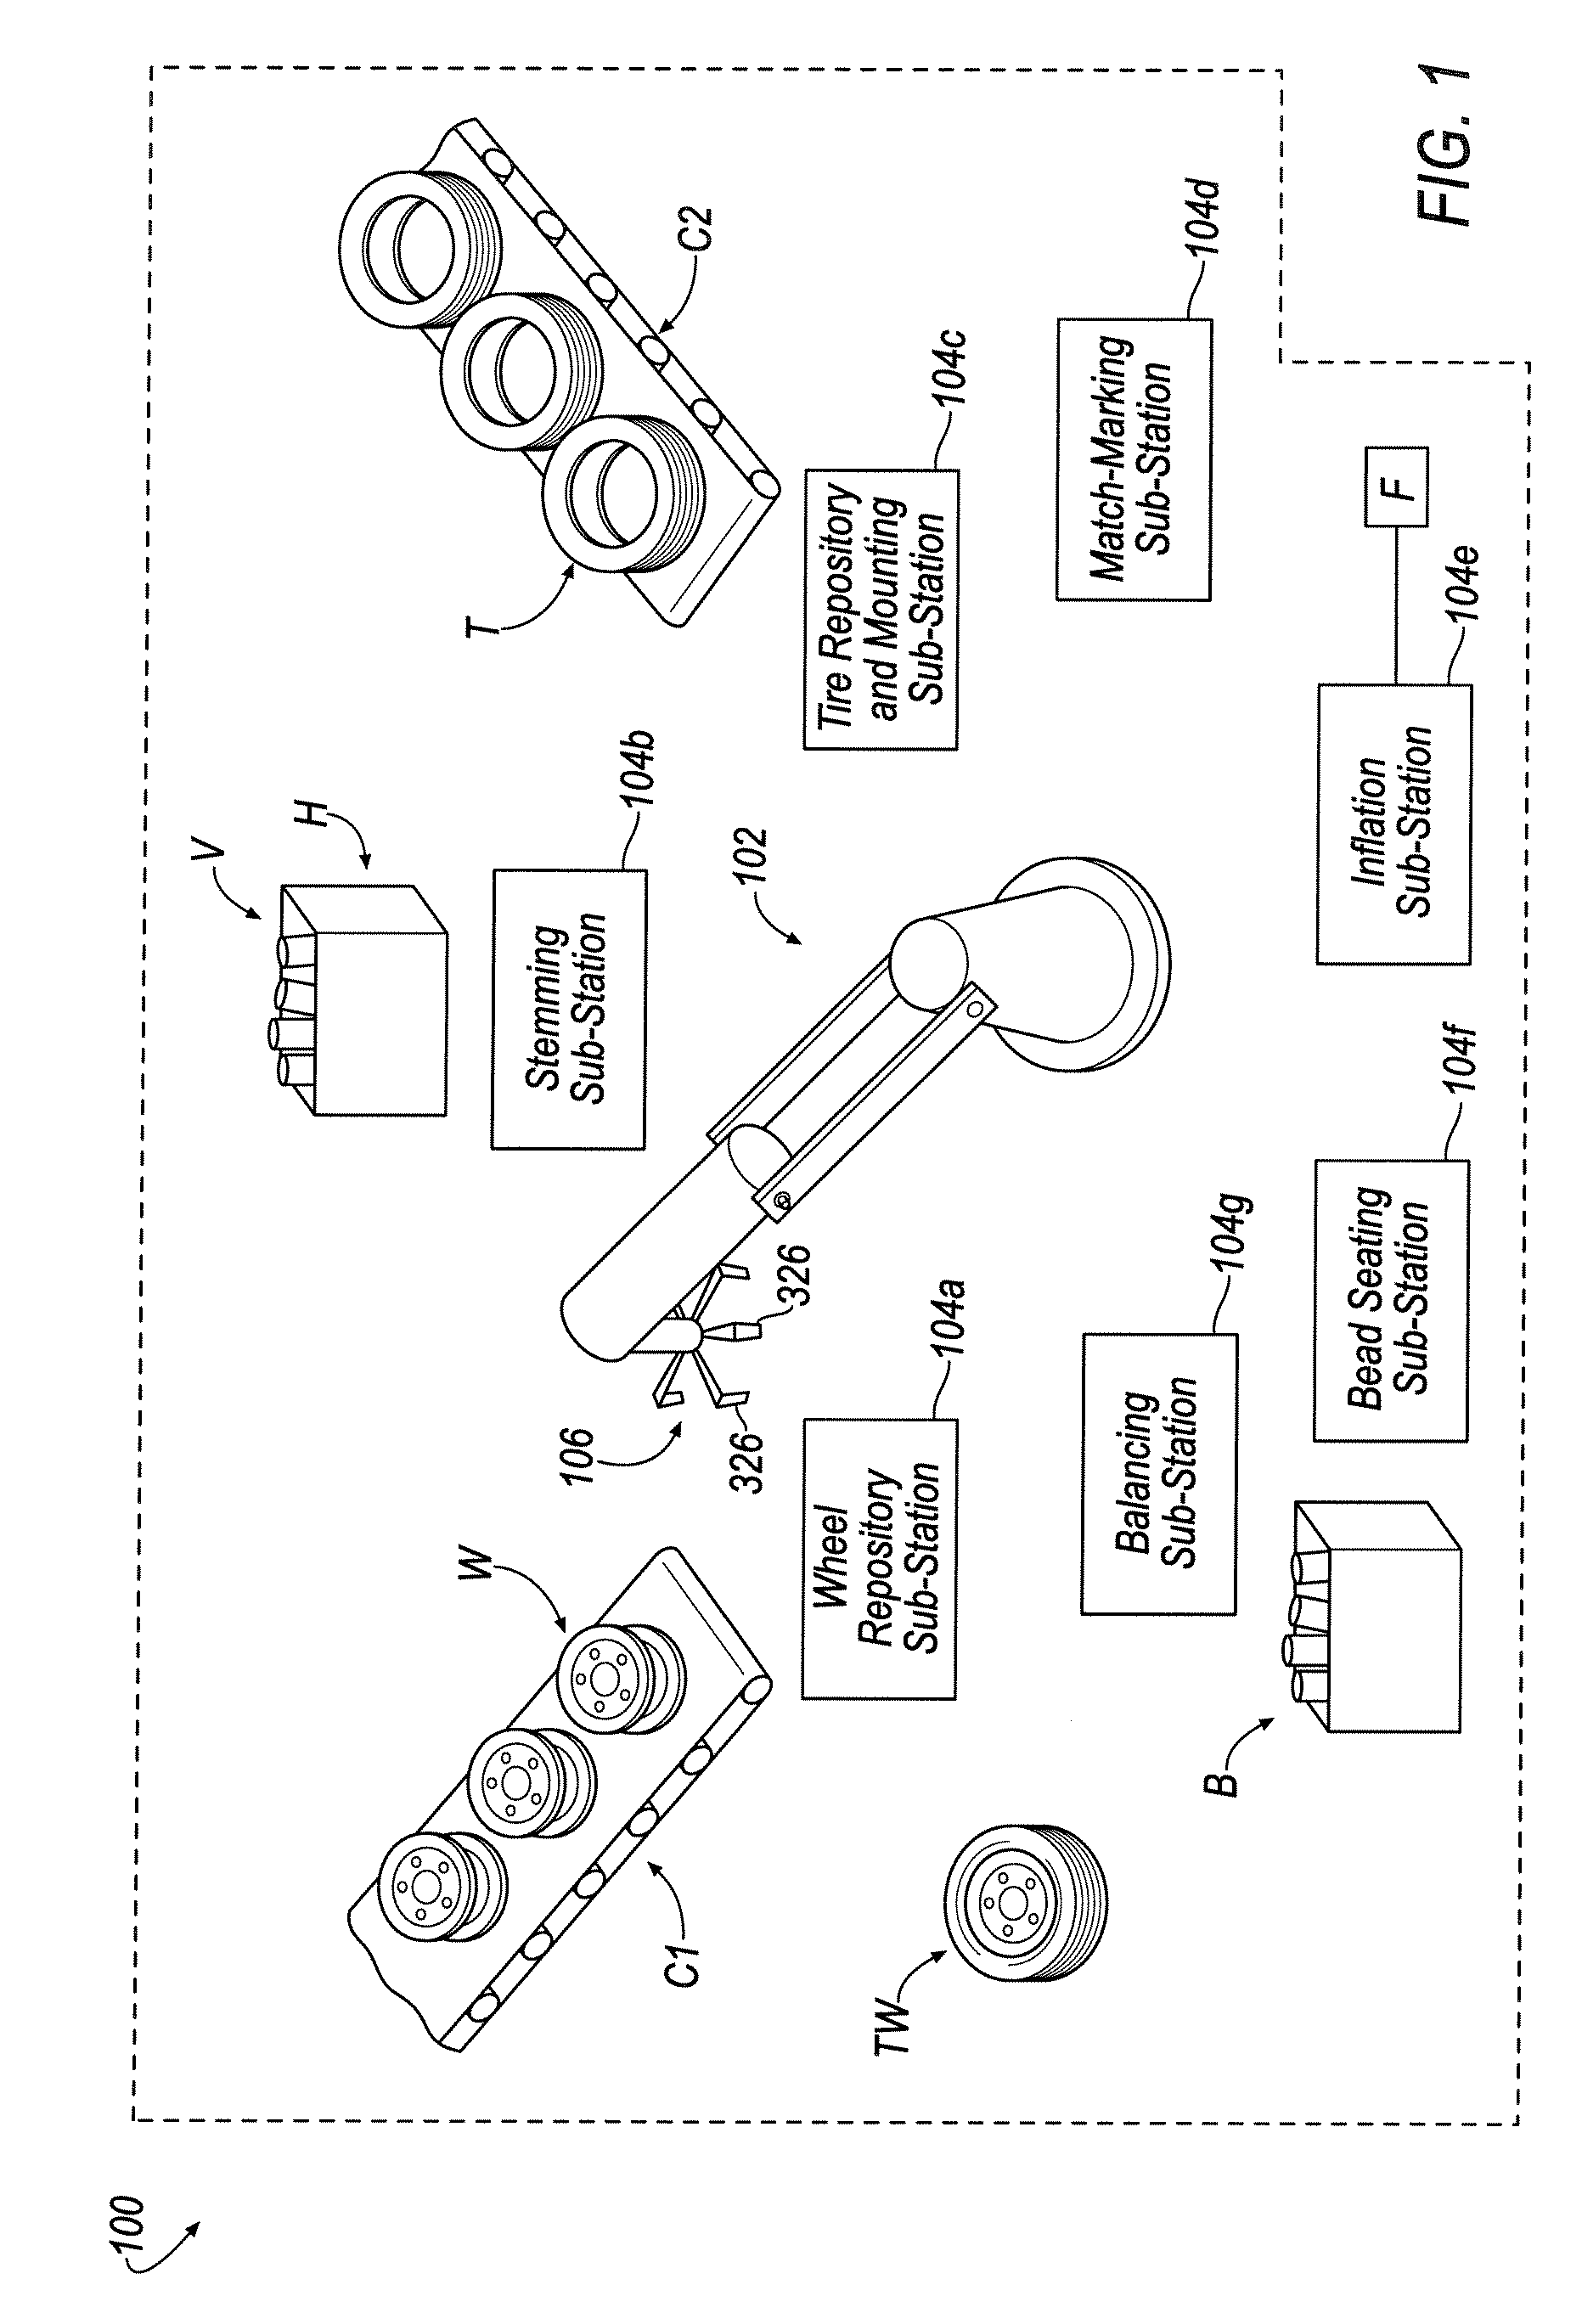 System and Method for Assembling a Tire and a Wheel